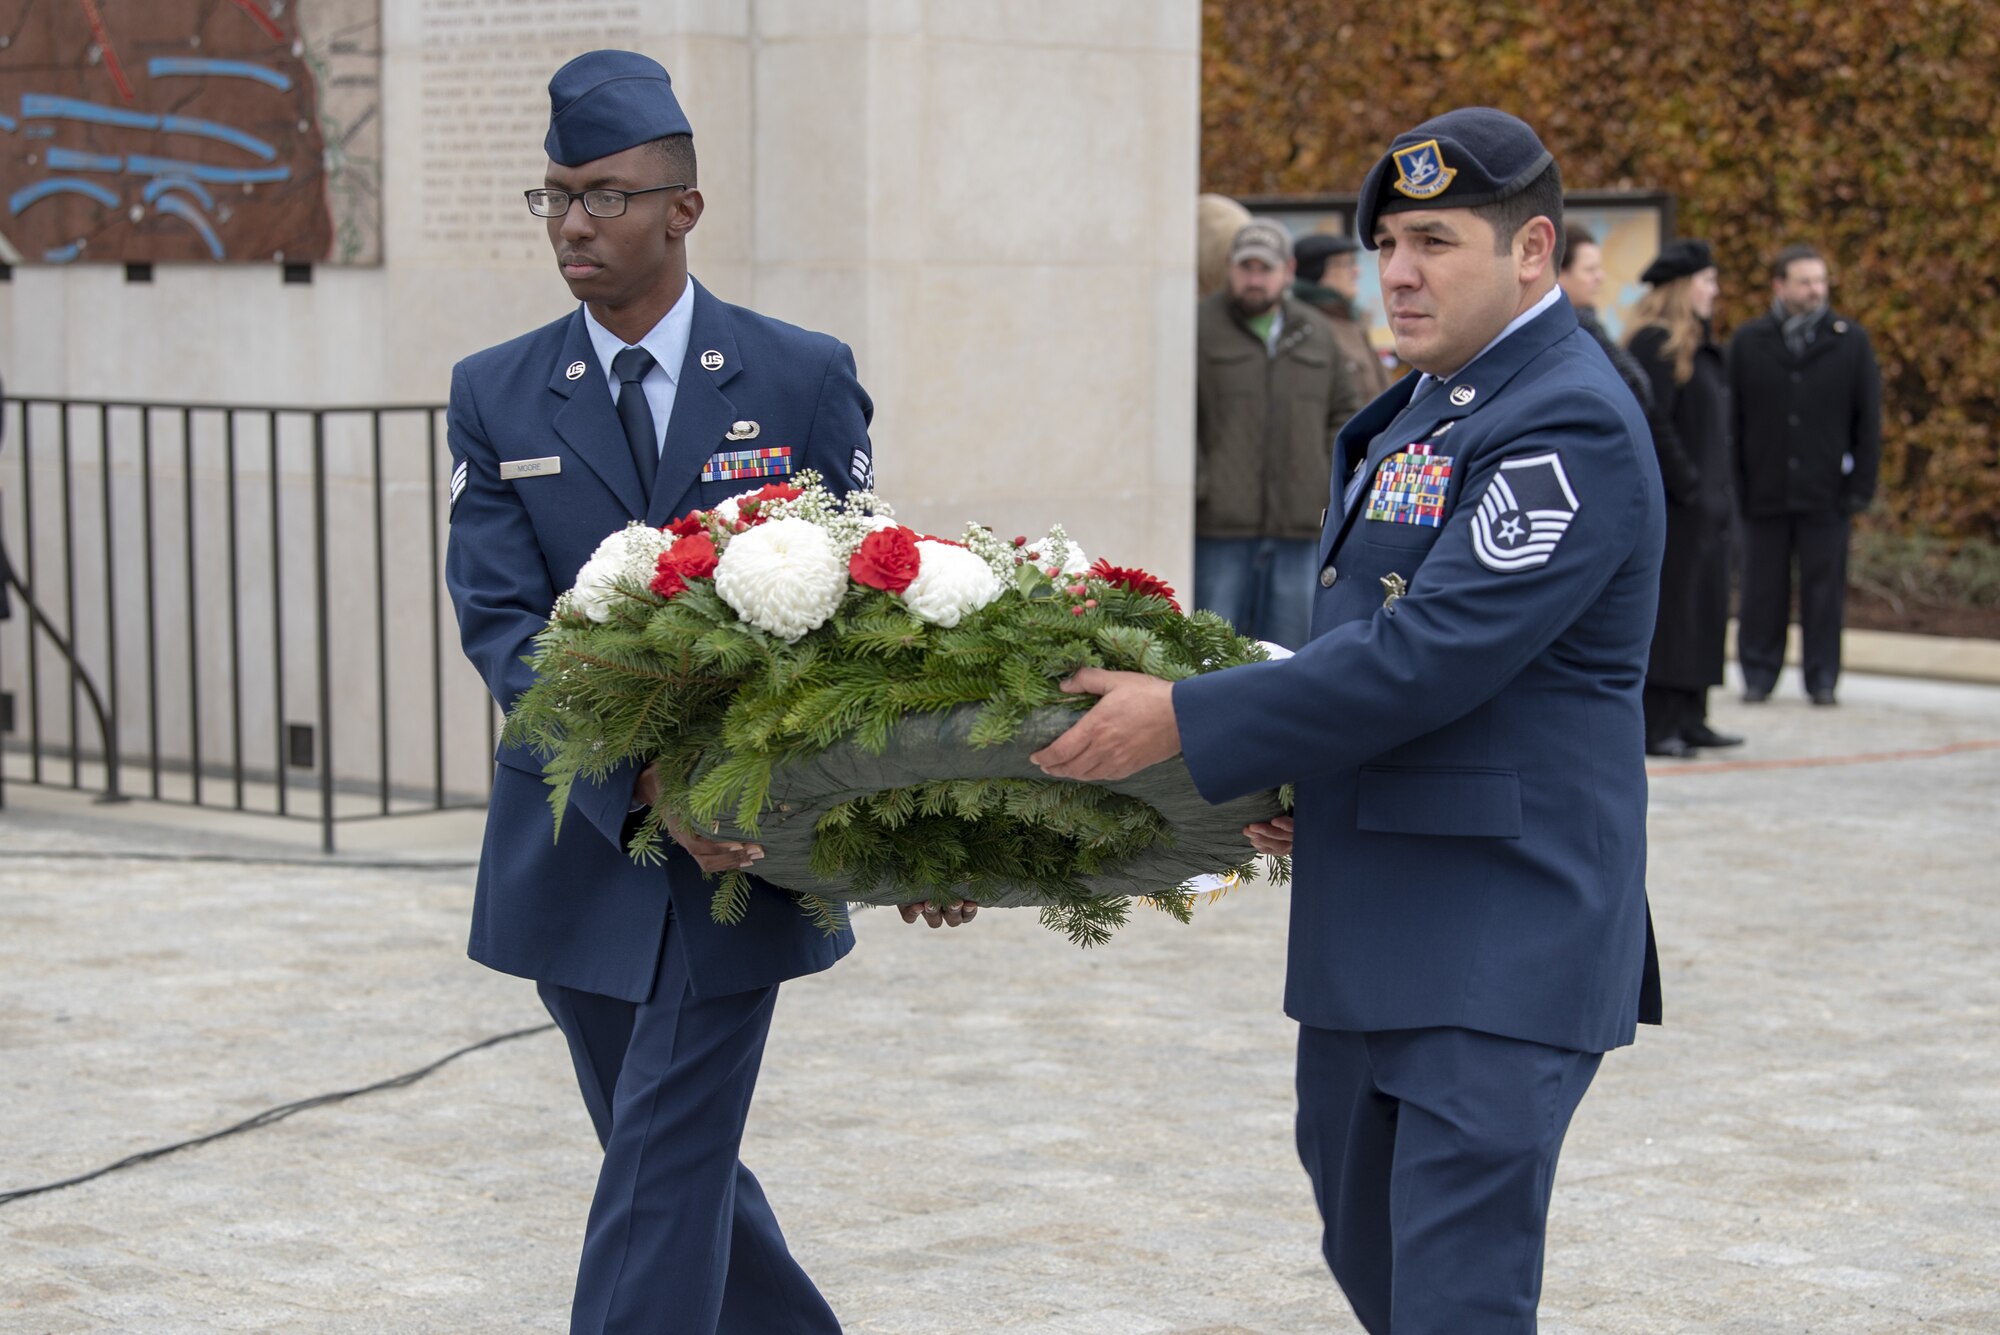 U.S. Air Force Senior Airman Brice Moore, 52nd Fighter Wing ground liaison analyst, and Master Sgt. Samuel Jalomo, 52nd Security Forces NCO in charge of operations, carry a wreath during the Veterans Day ceremony on the Luxembourg American Cemetery in Hamm, Luxembourg, Nov. 11, 2019. The cemetery is home to more than 5,000 service members who died during World War II, including U.S. Army Gen. George S. Patton. (U.S. Air Force photo by Airman First Class Branden Rae)